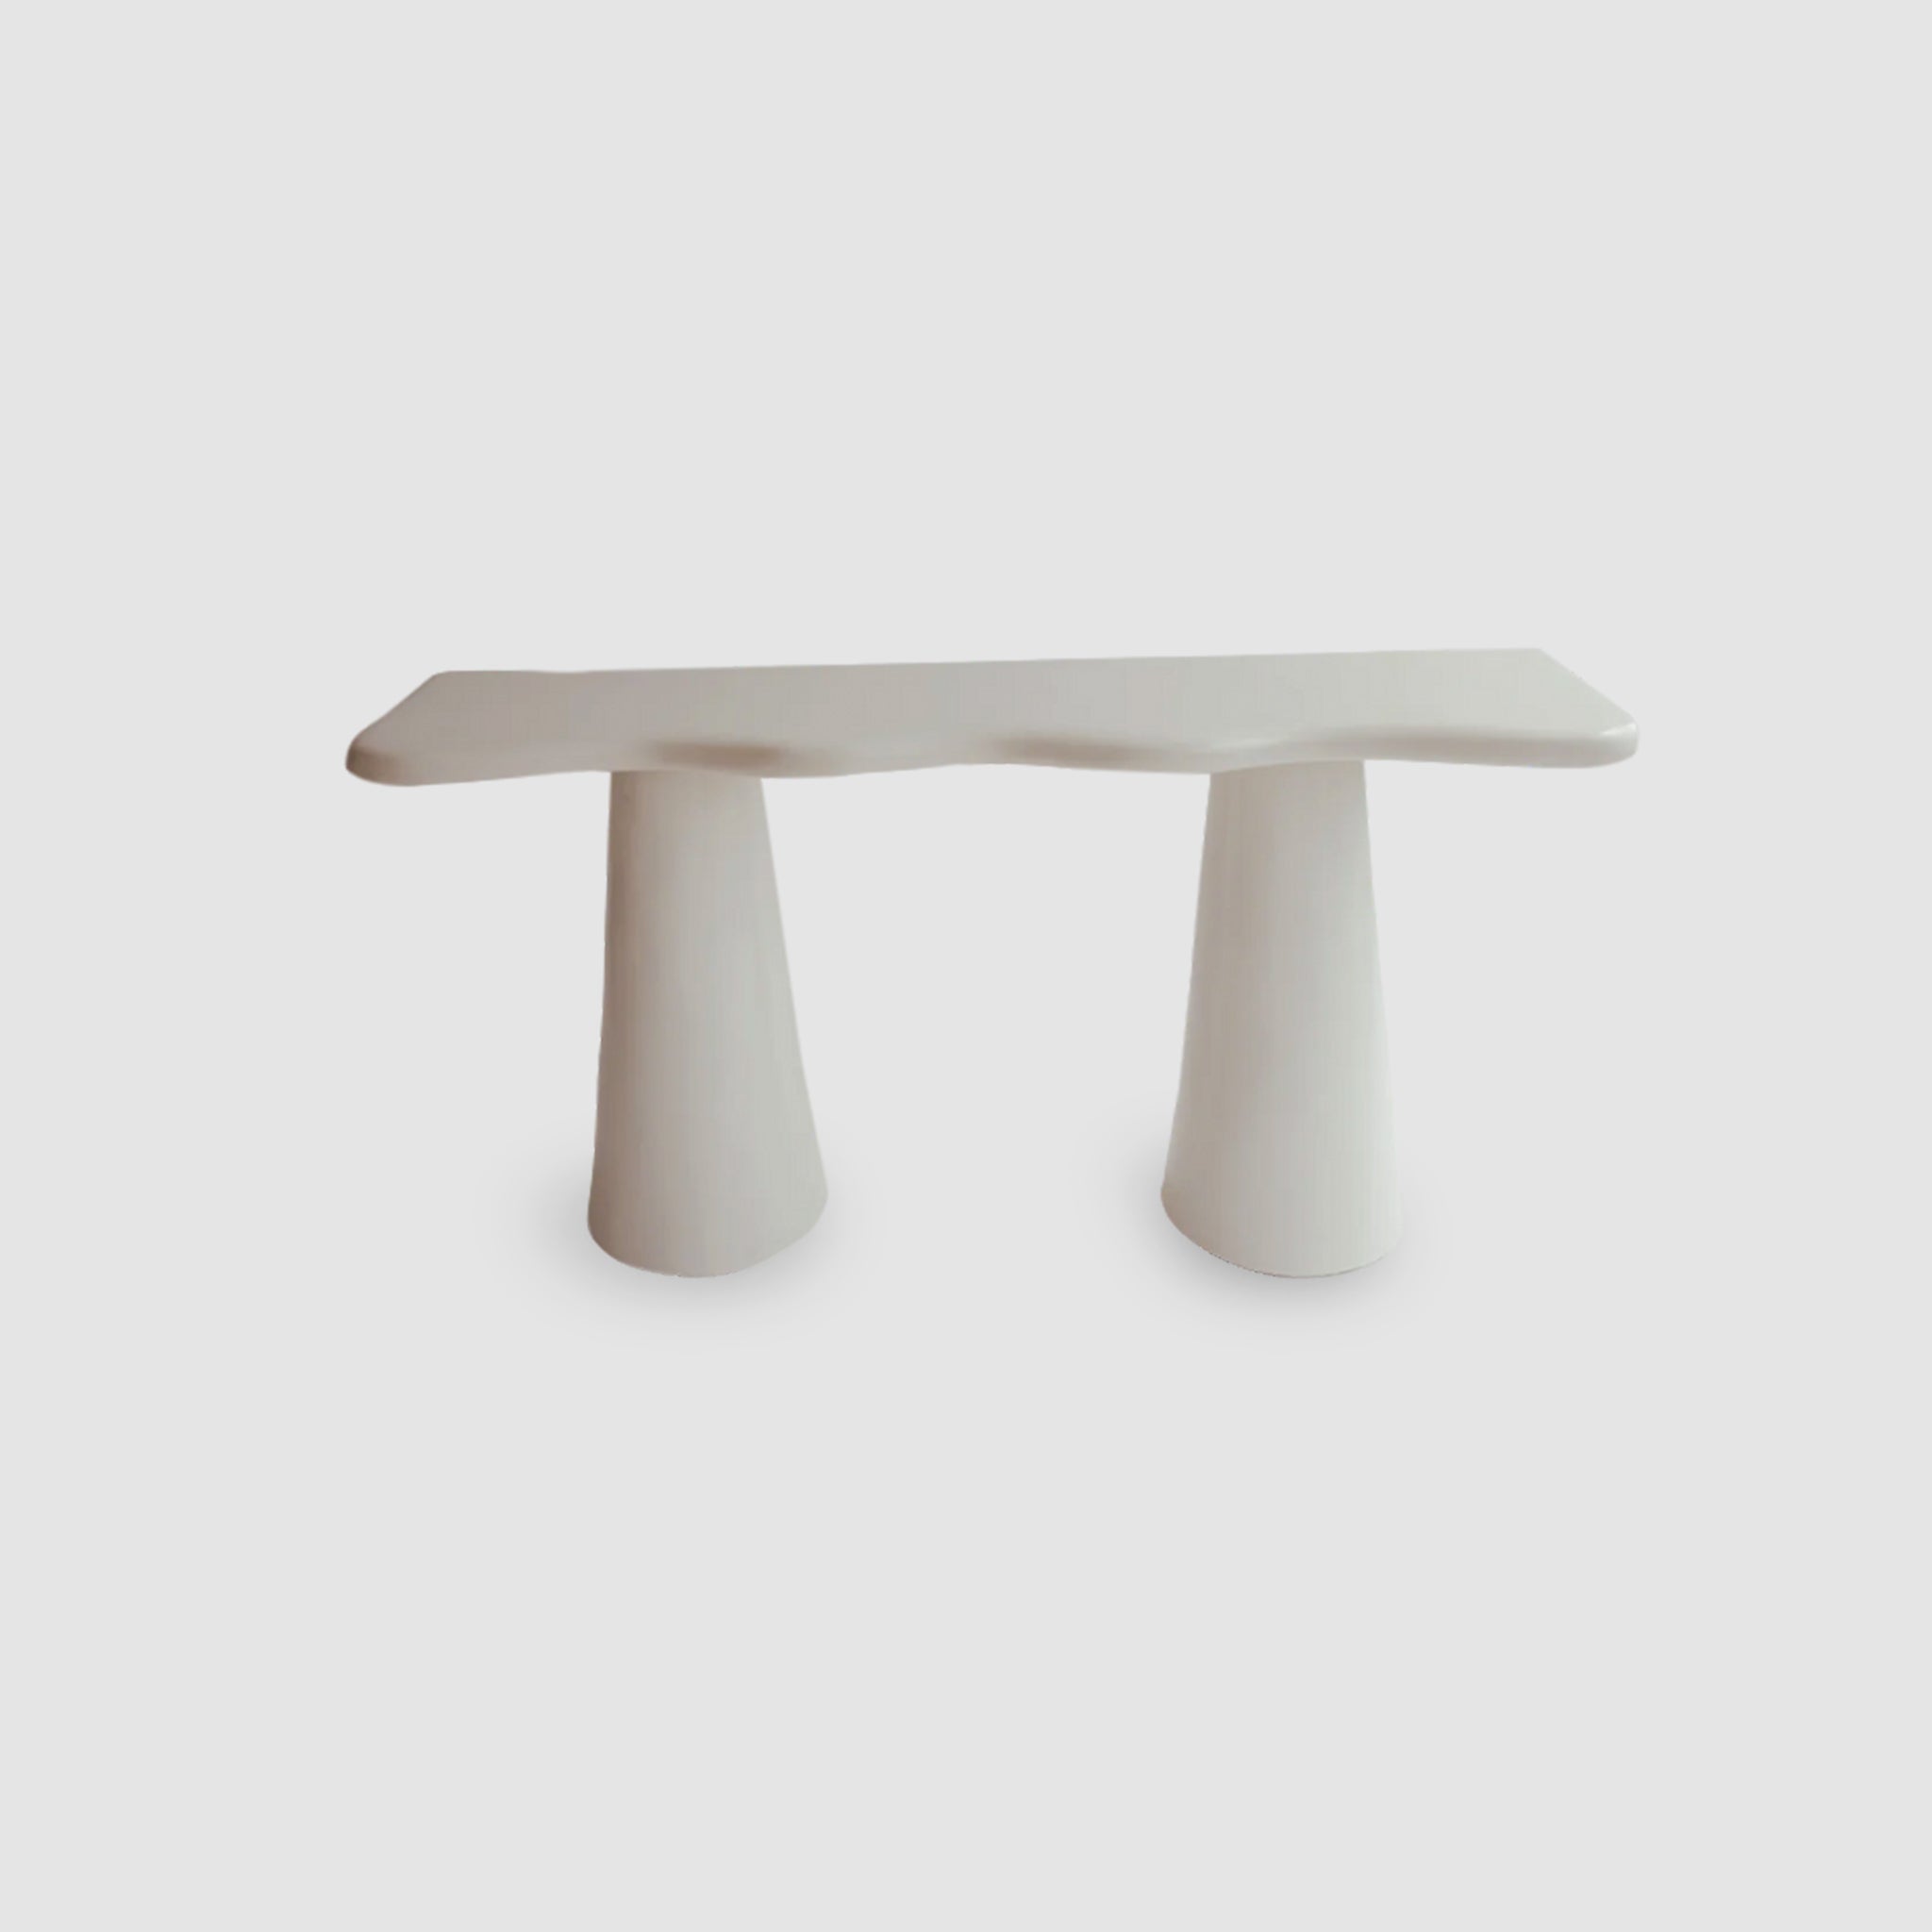 "The Alma Console with a curvy, statement-making design in white microplaster finish."